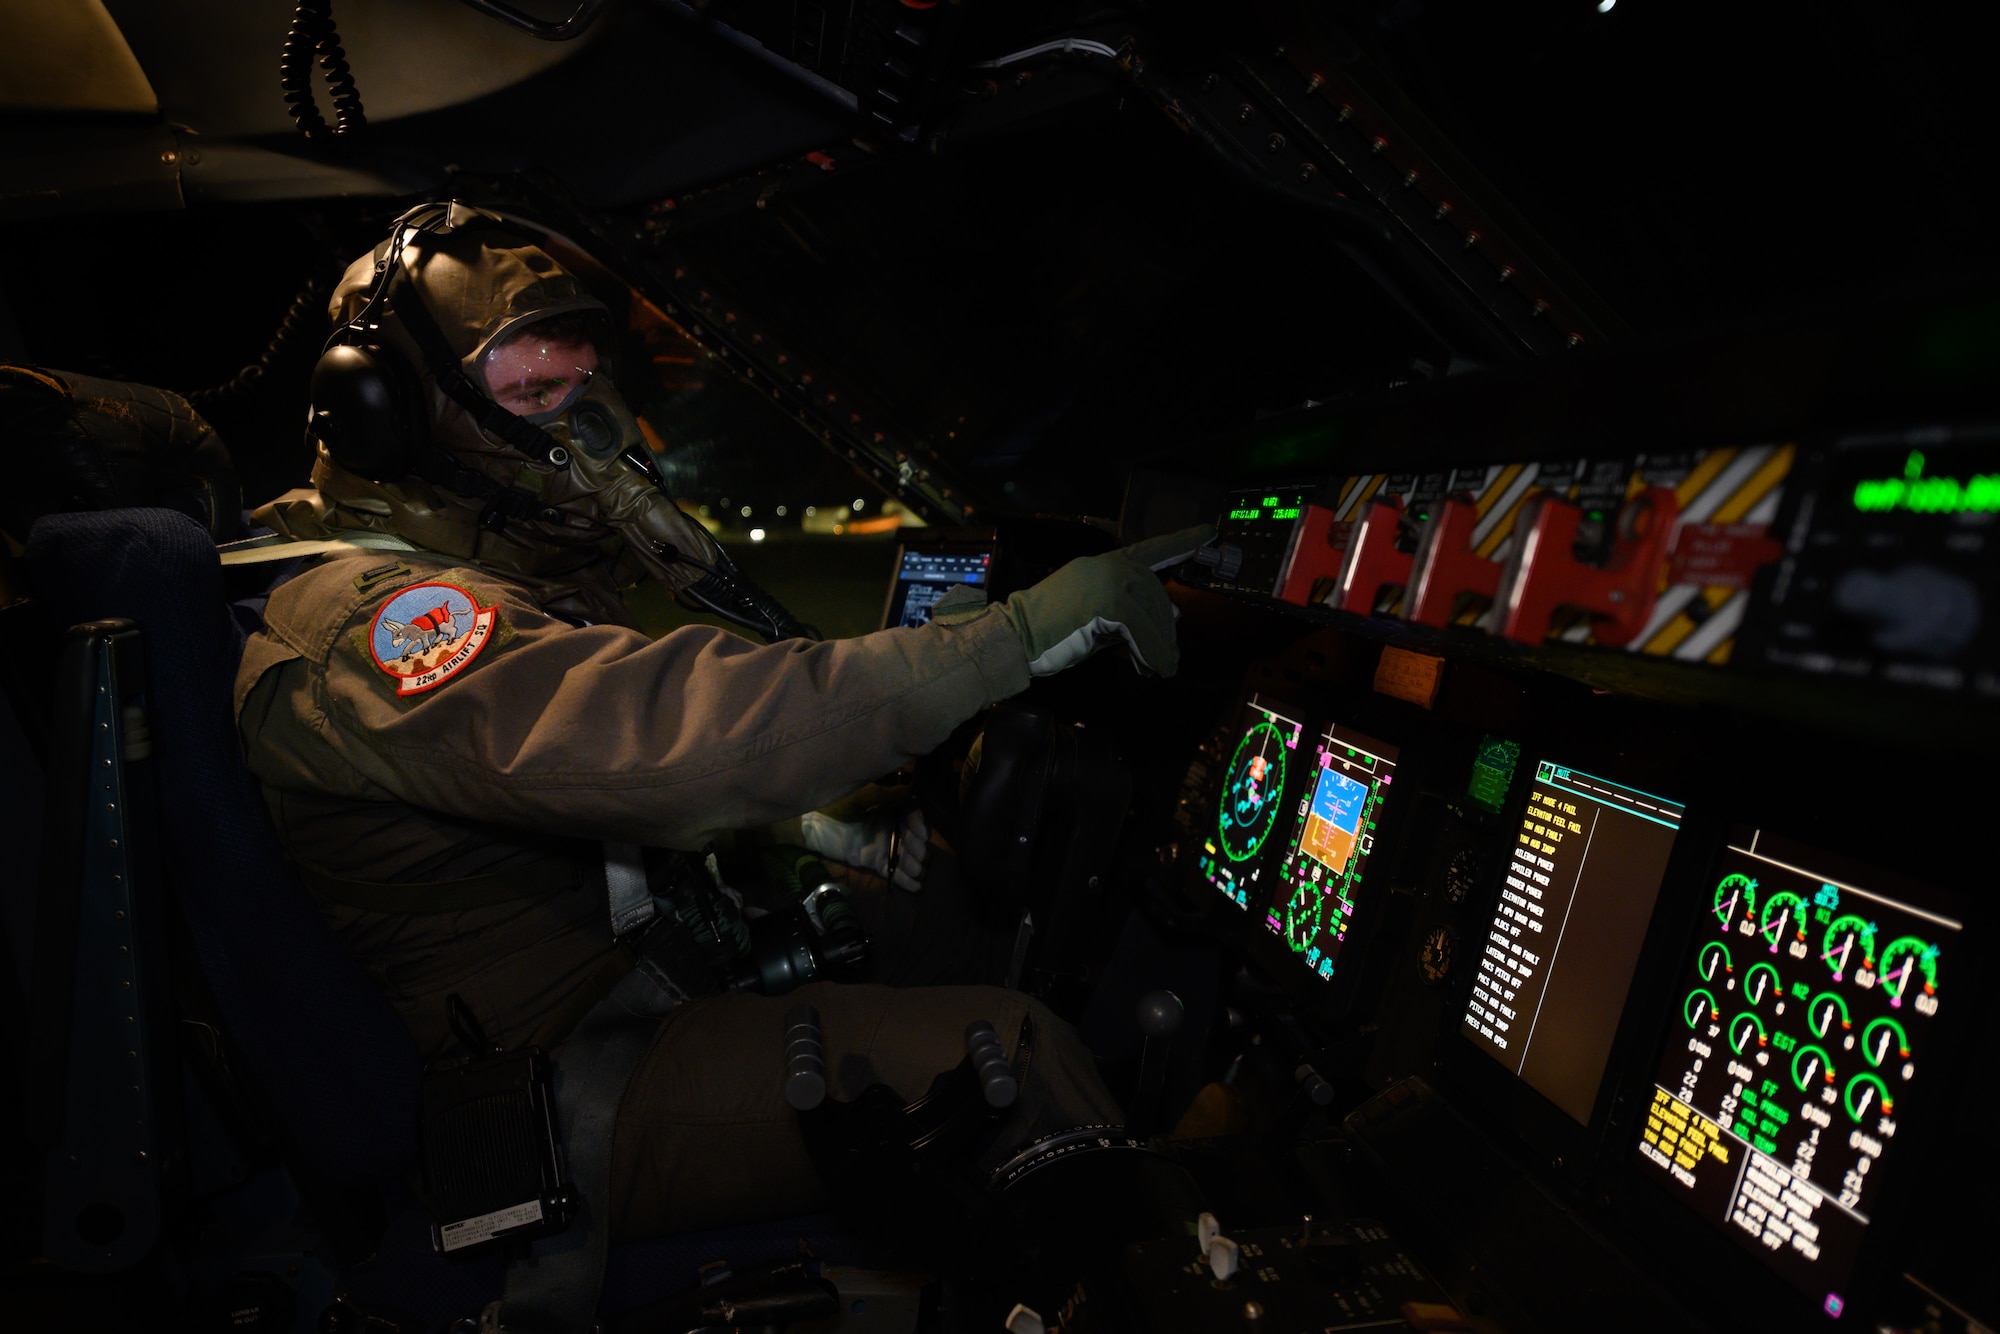 U.S. Air Force 1st Lt. Khaleb Kelsey, 22nd Airlift Squadron C-5M Super Galaxy pilot, prepares for takeoff during a base exercise Nov. 18, 2020, at Travis Air Force Base, California. Airmen at Travis AFB participate in readiness exercises to ensure they can operate in contested environments. (U.S. Air Force photo by Chustine Minoda)